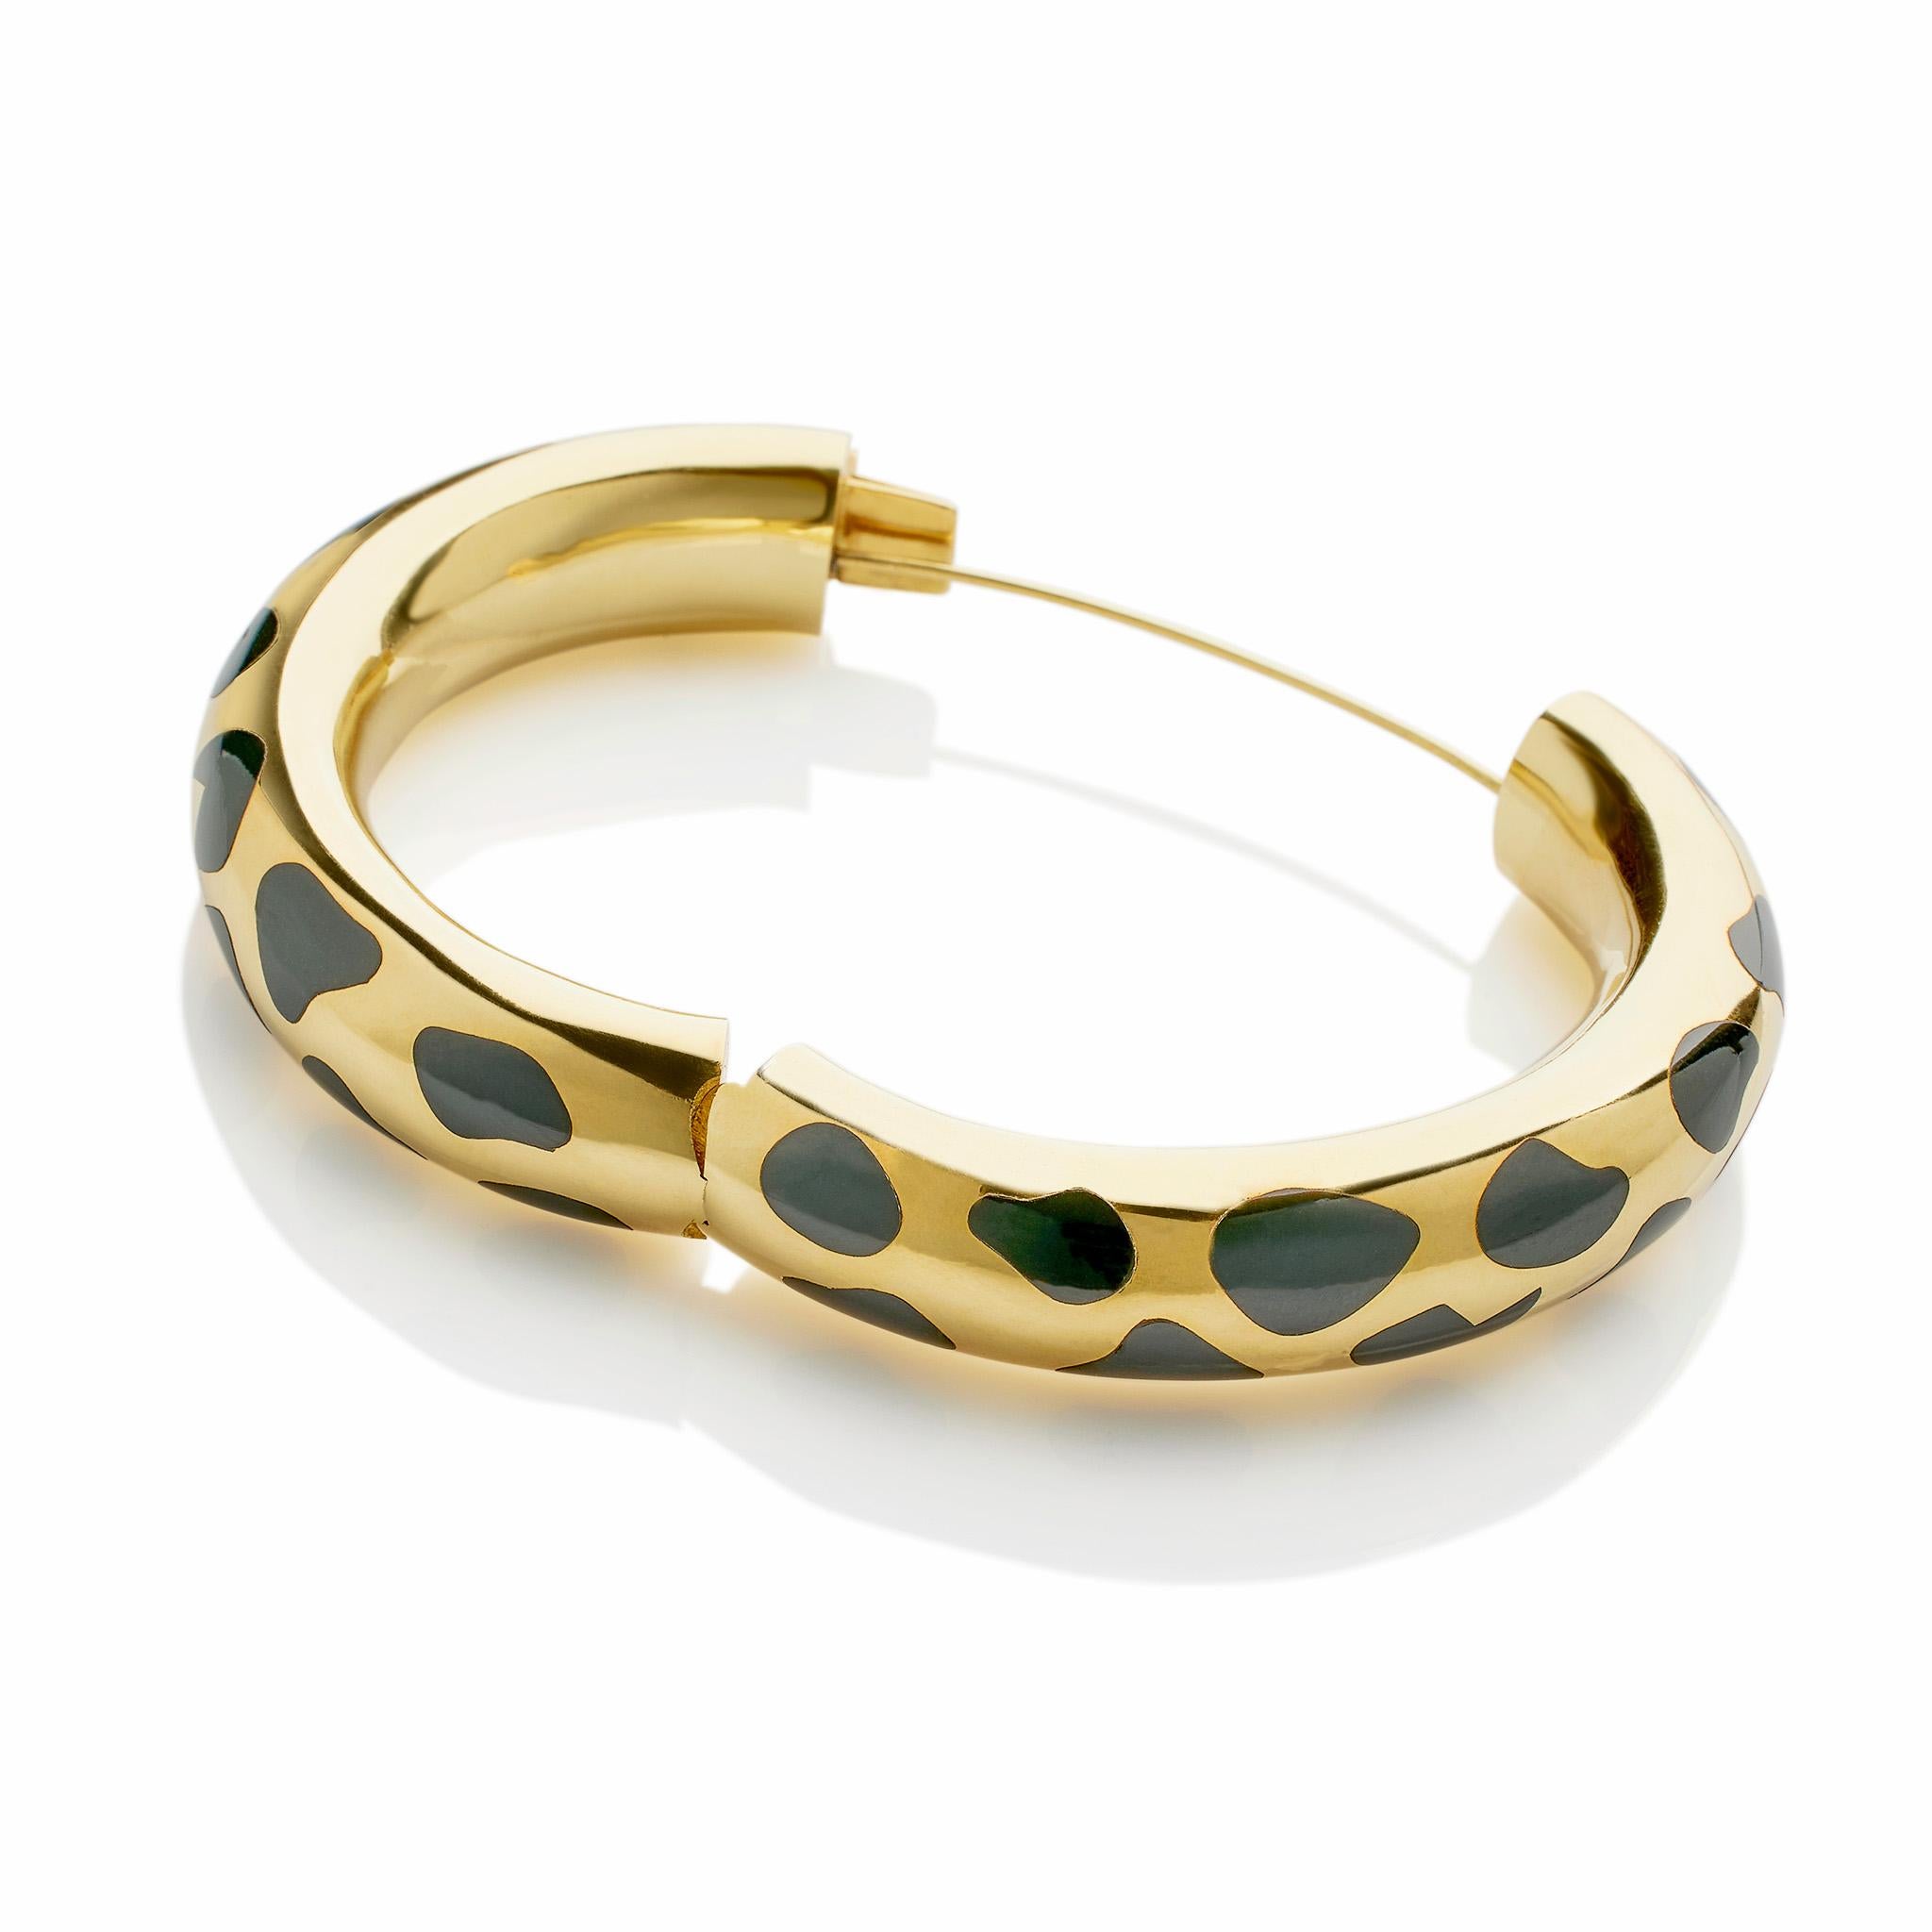 Created by Tiffany & Co. in the 1970s, this 18K gold and black jade bracelet was designed by Angela Cummings. The hinged, polished 18K gold bangle is inlaid with irregular spots of black jade resembling a leopard skin that are flush with the curved